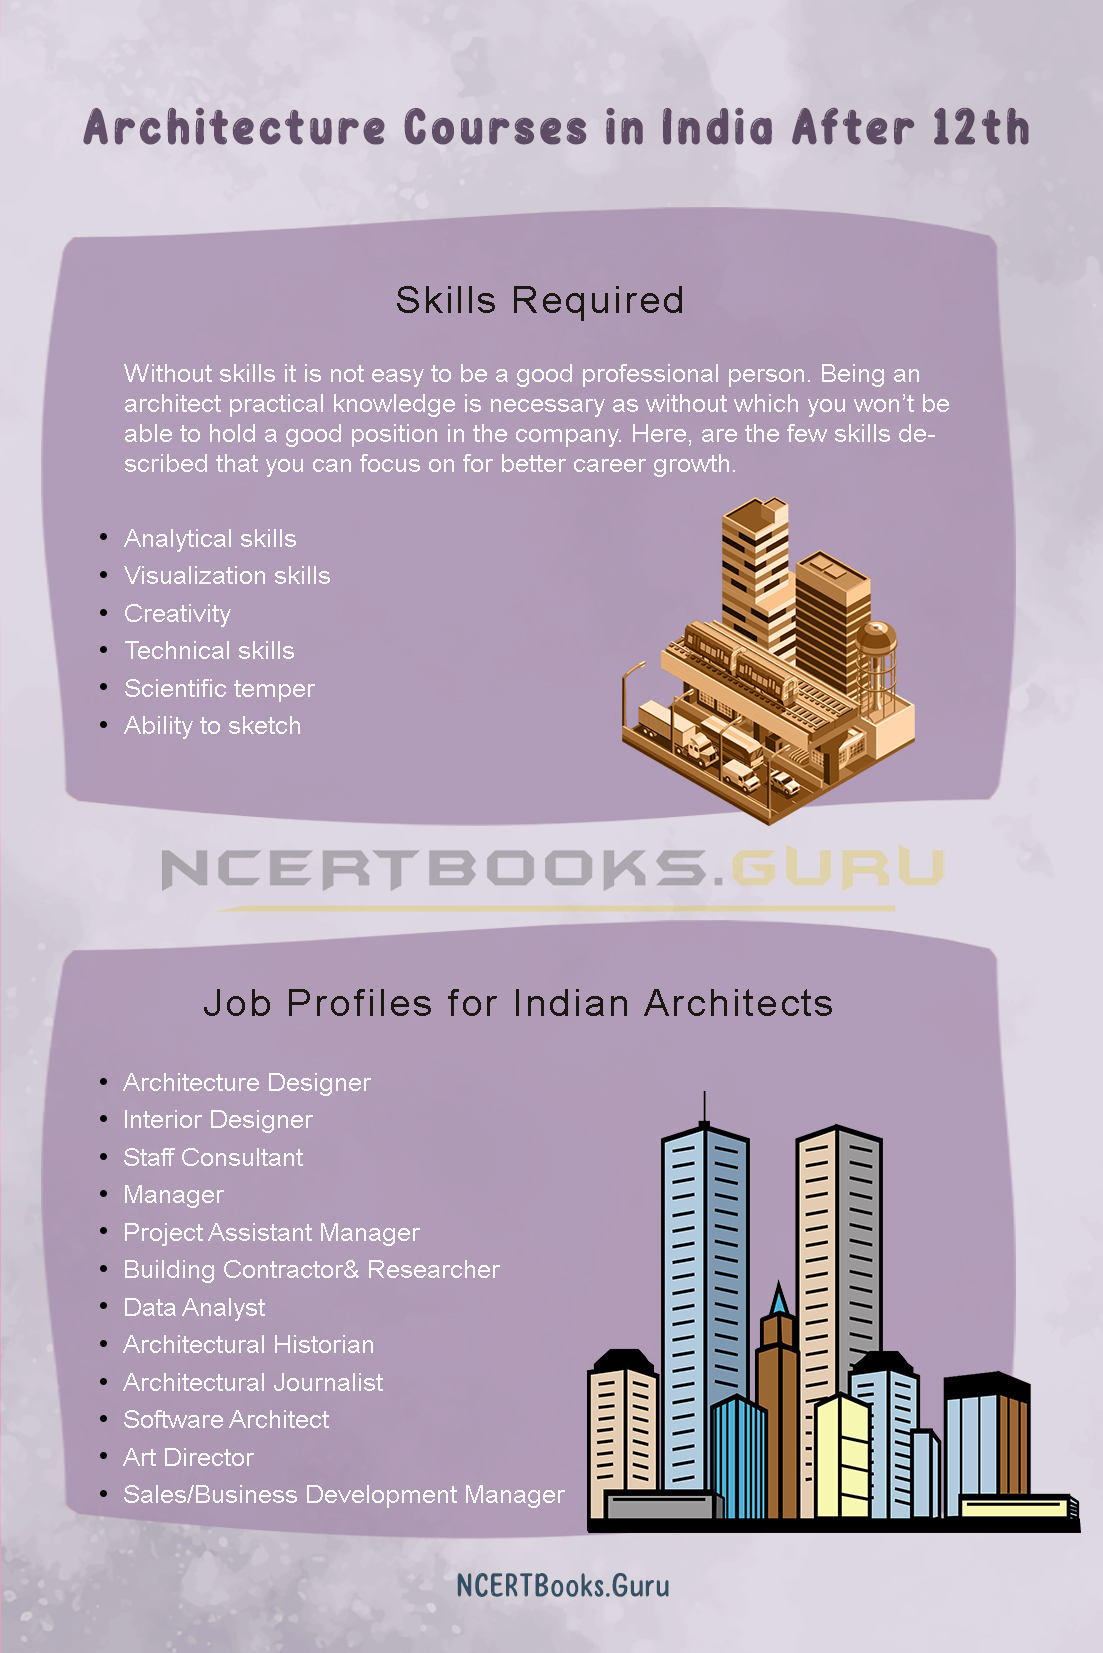 Architecture Courses in India After 12th 2